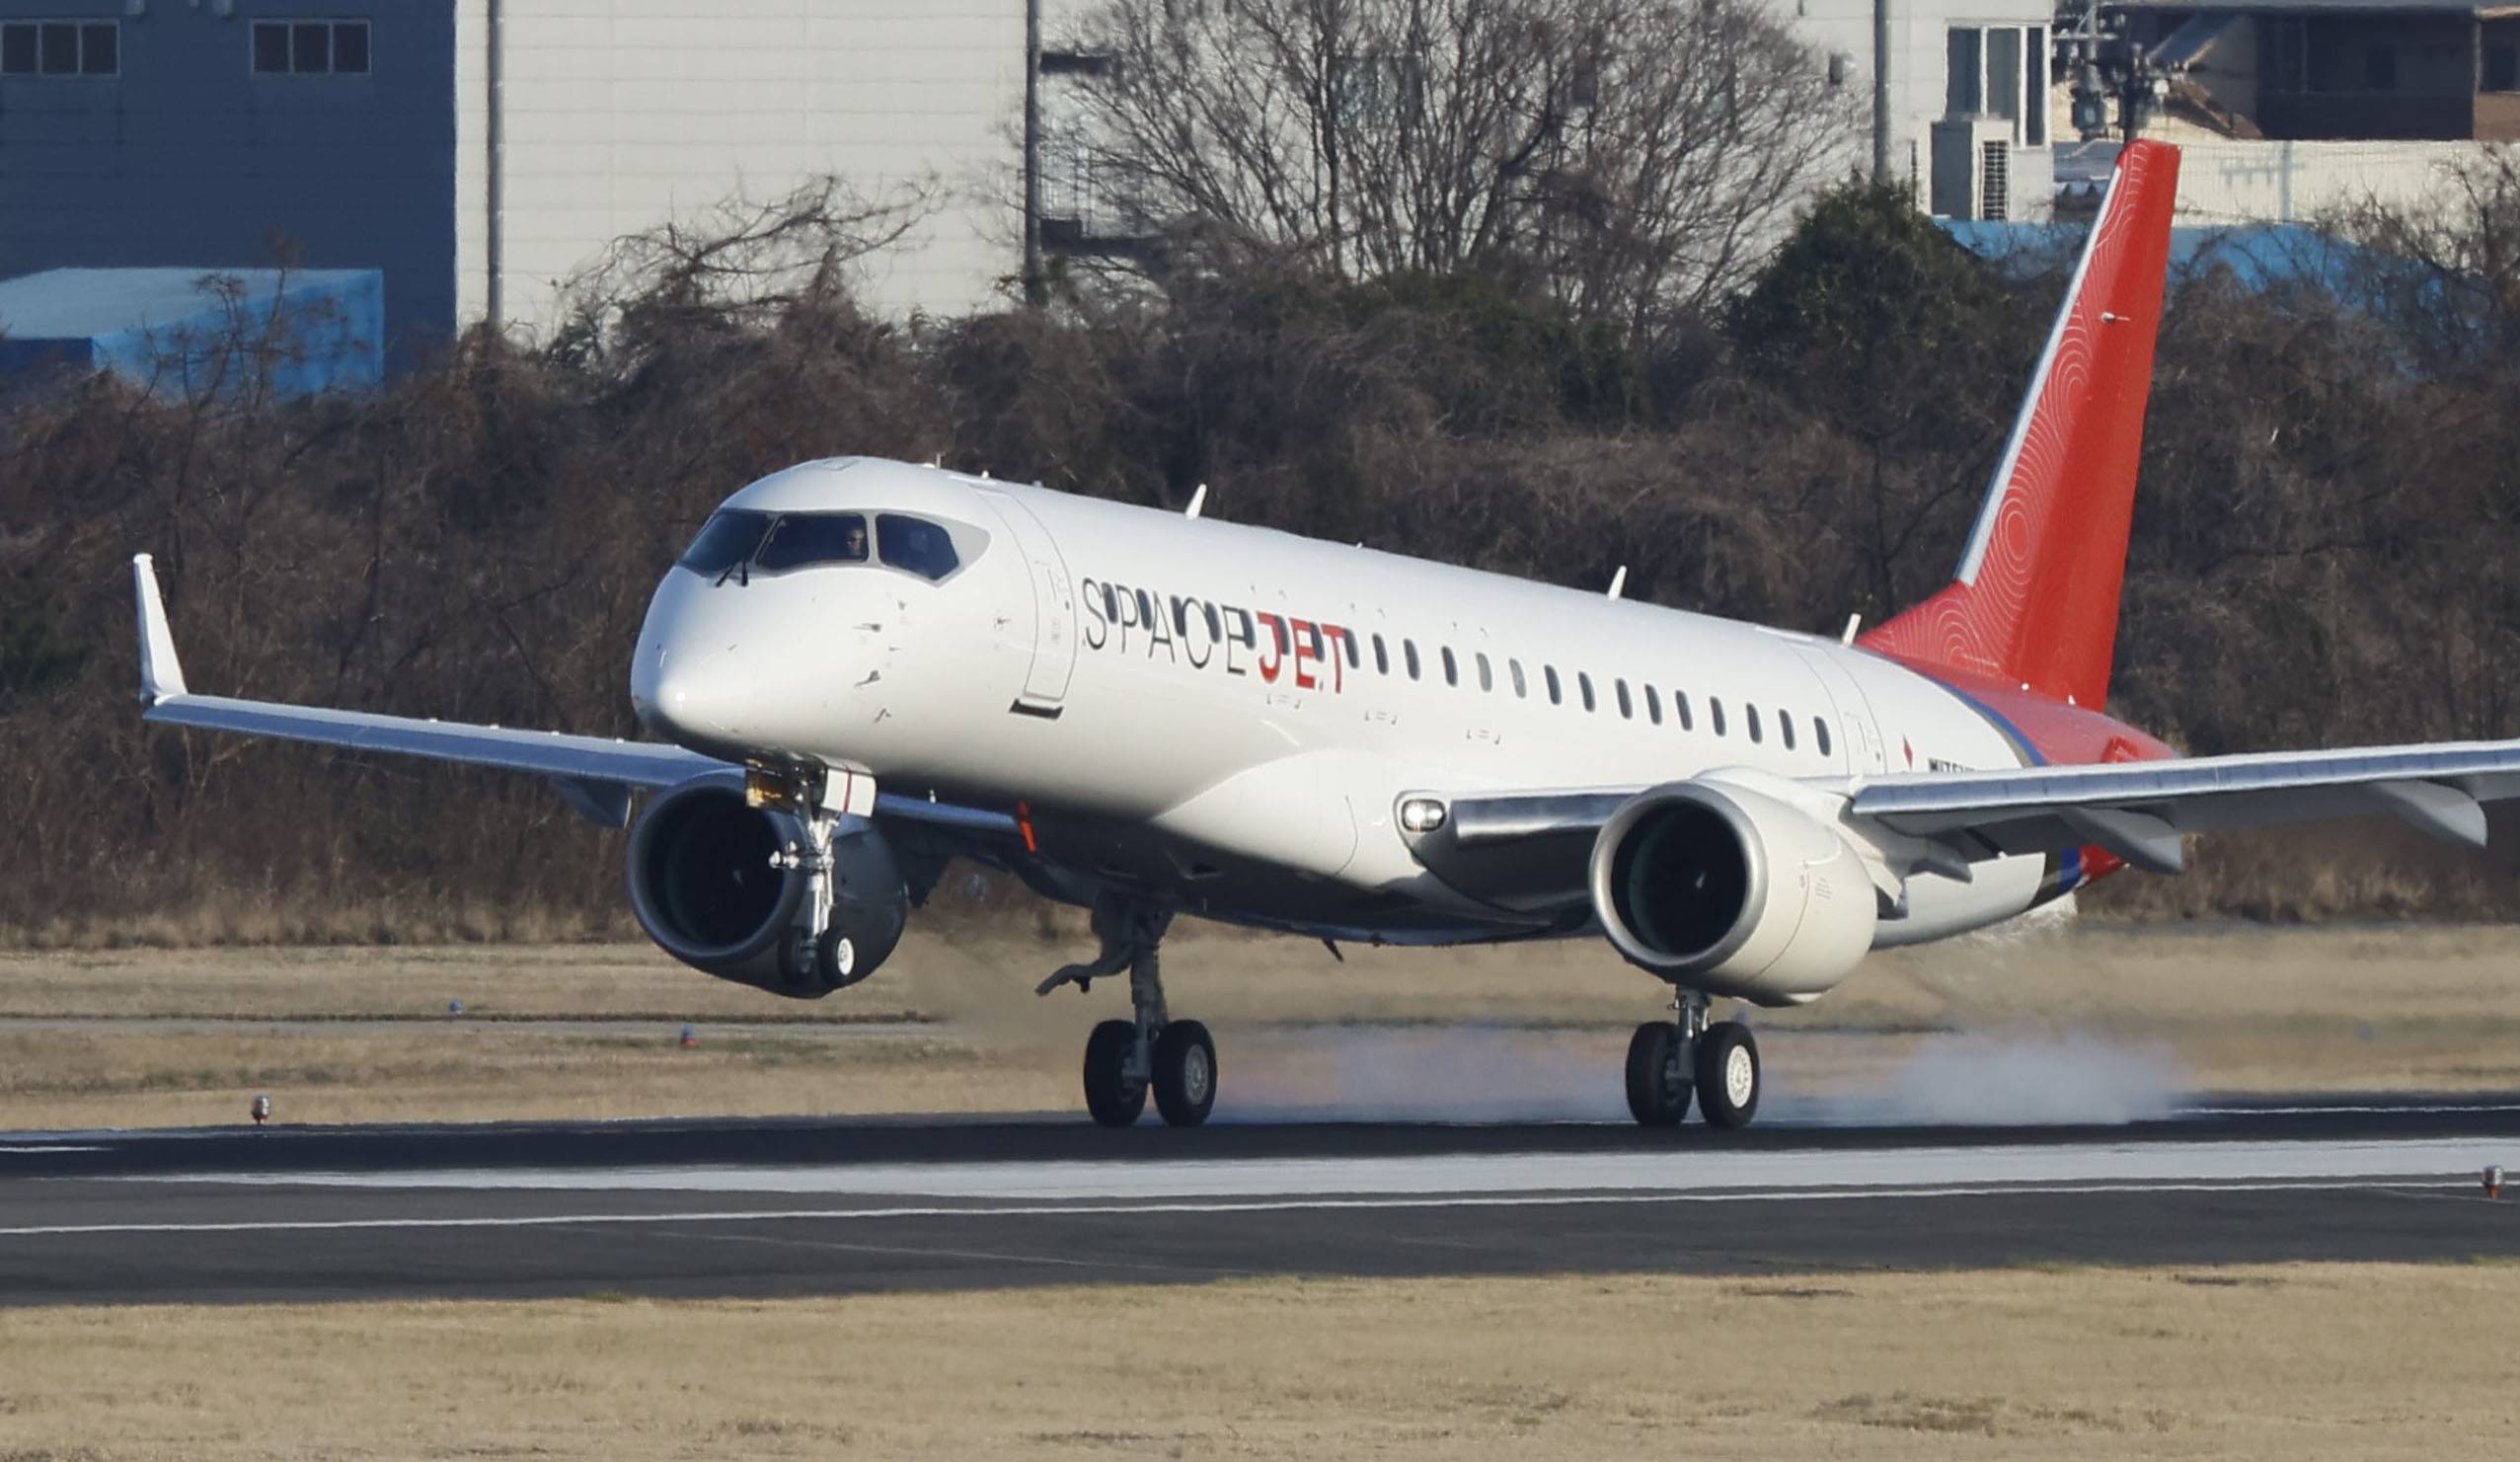 A Mitsubishi SpaceJet test plane at Nagoya airport on March 18, 2020